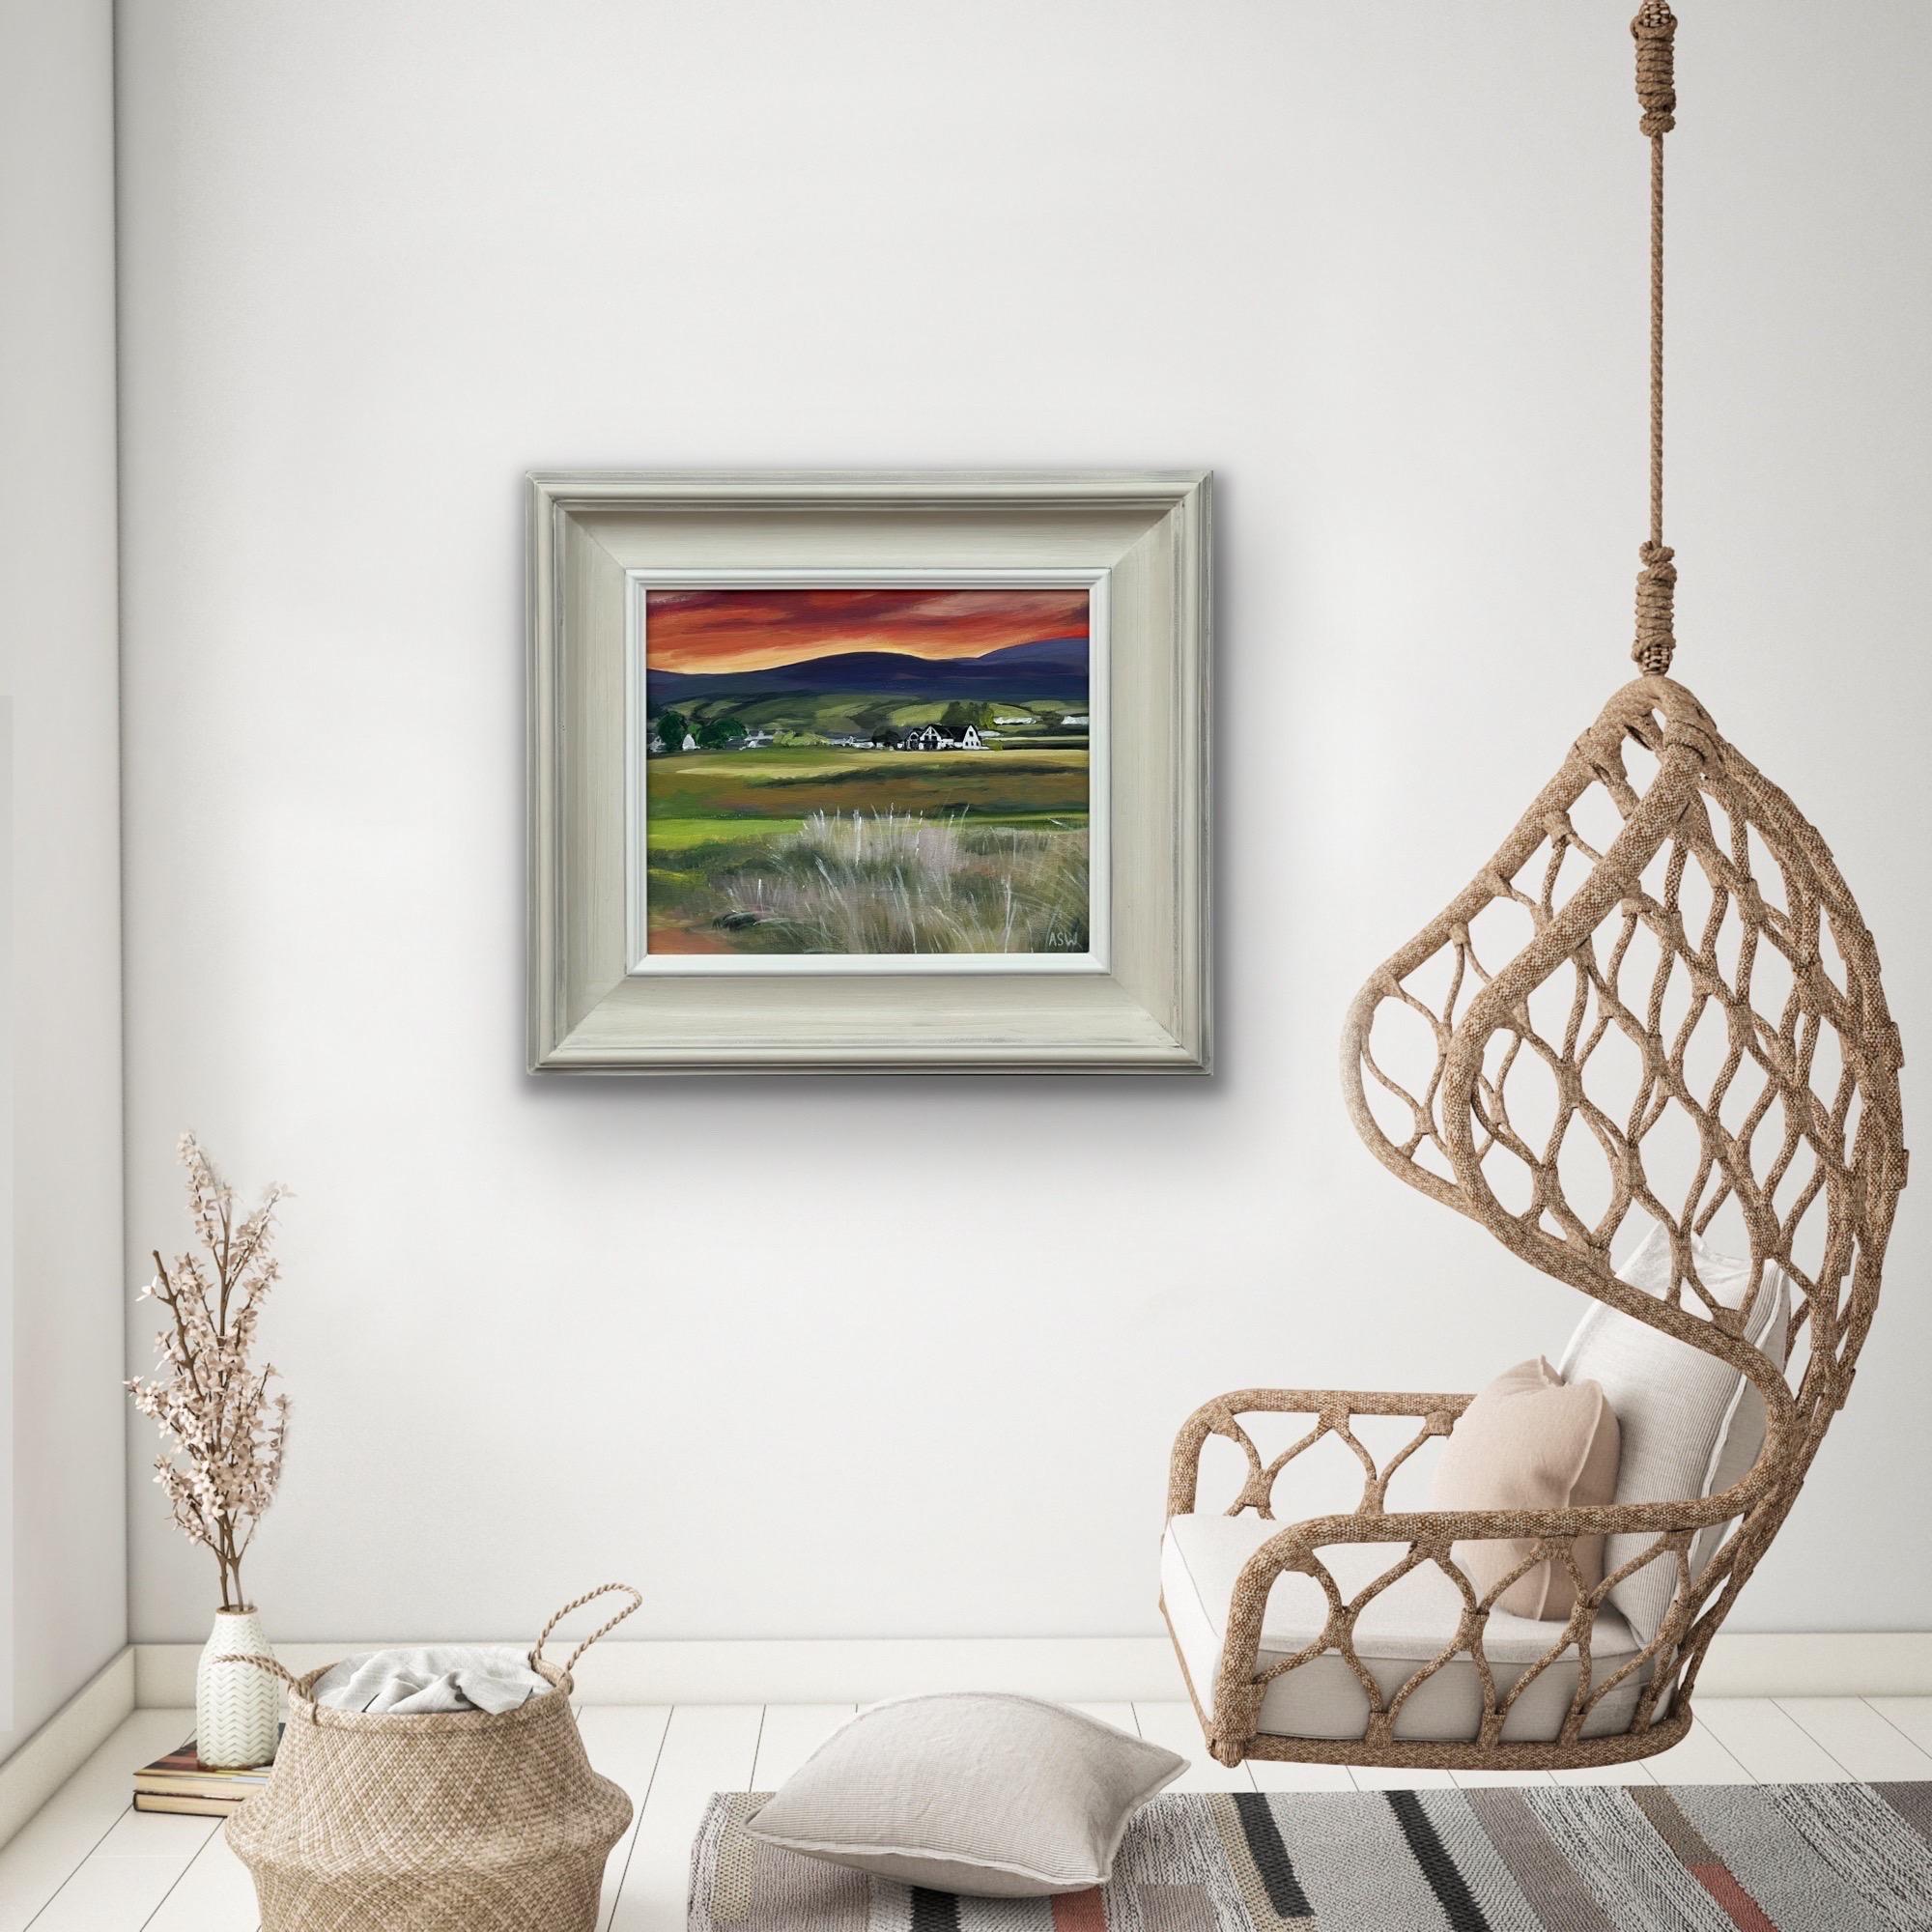 Sunset at Brora Golf Course in the Scottish Highlands by Contemporary British Artist, Angela Wakefield. This unique original depicts a deep red orange sunset on the east coast of Scotland. 

Art measures 12 x 10 inches 
Frame measures 18 x 16 inches